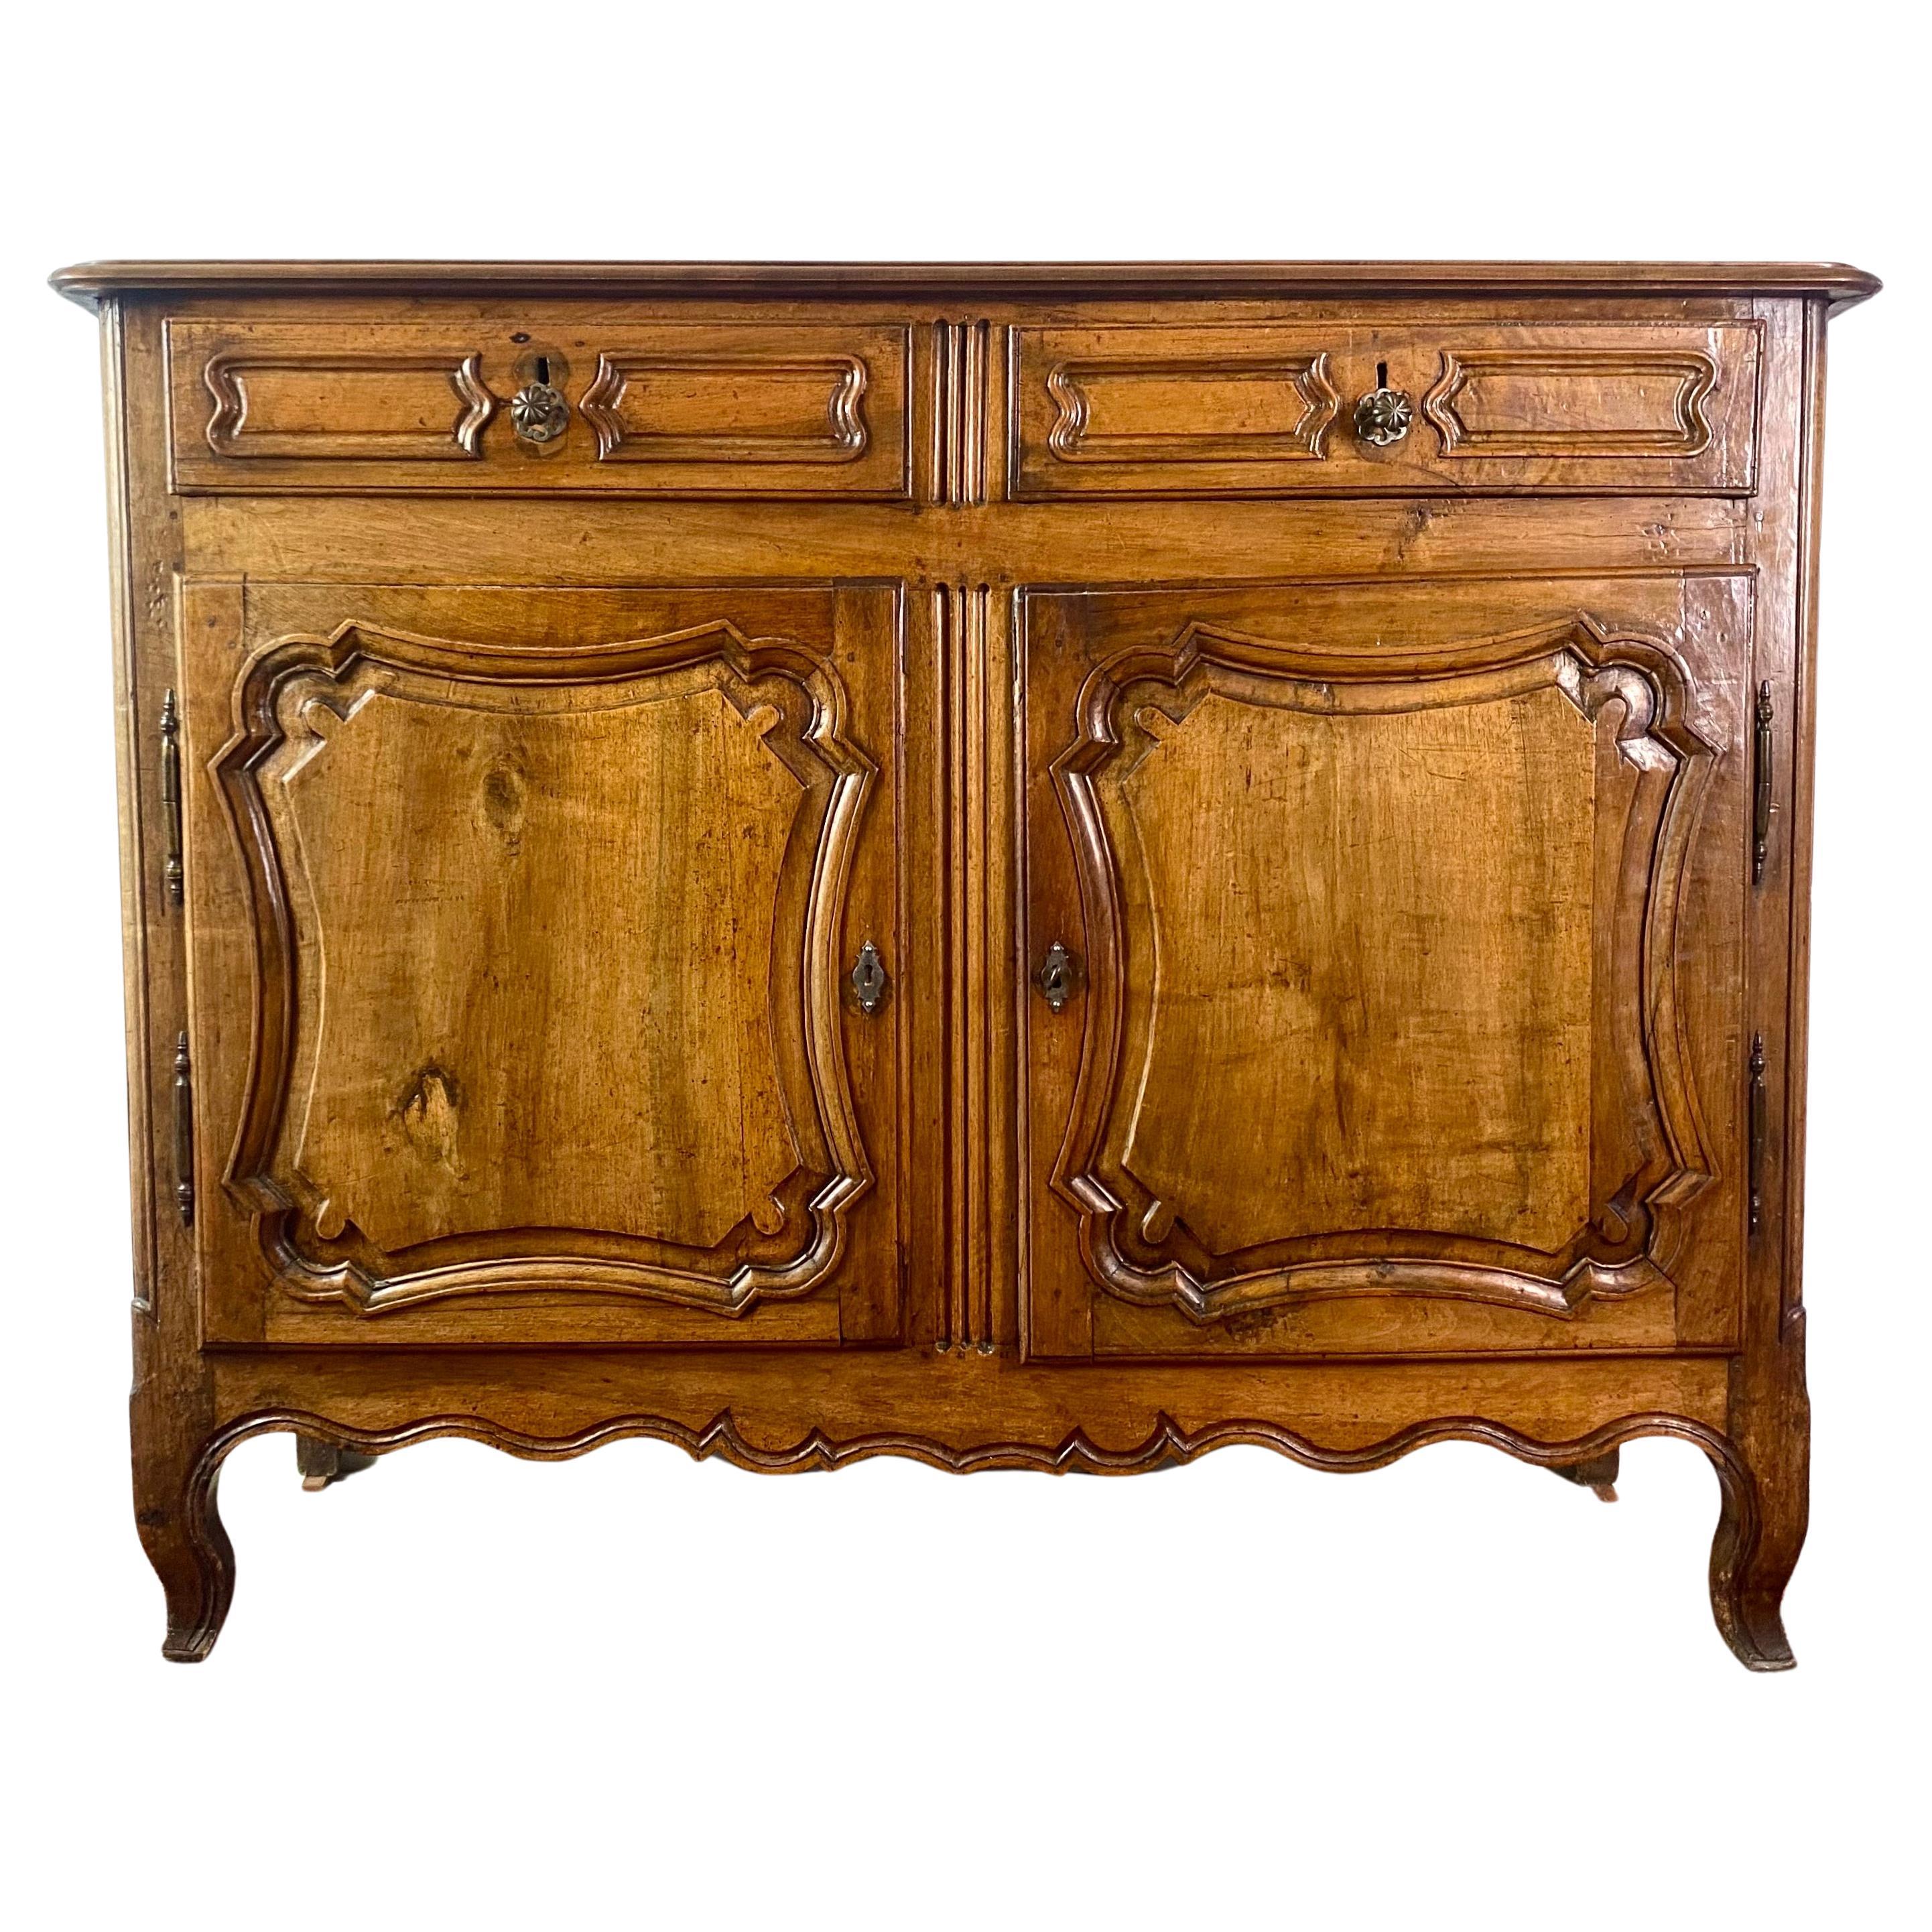 French Provençal sideboard in walnut - Louis XV Period - 18th century - France For Sale